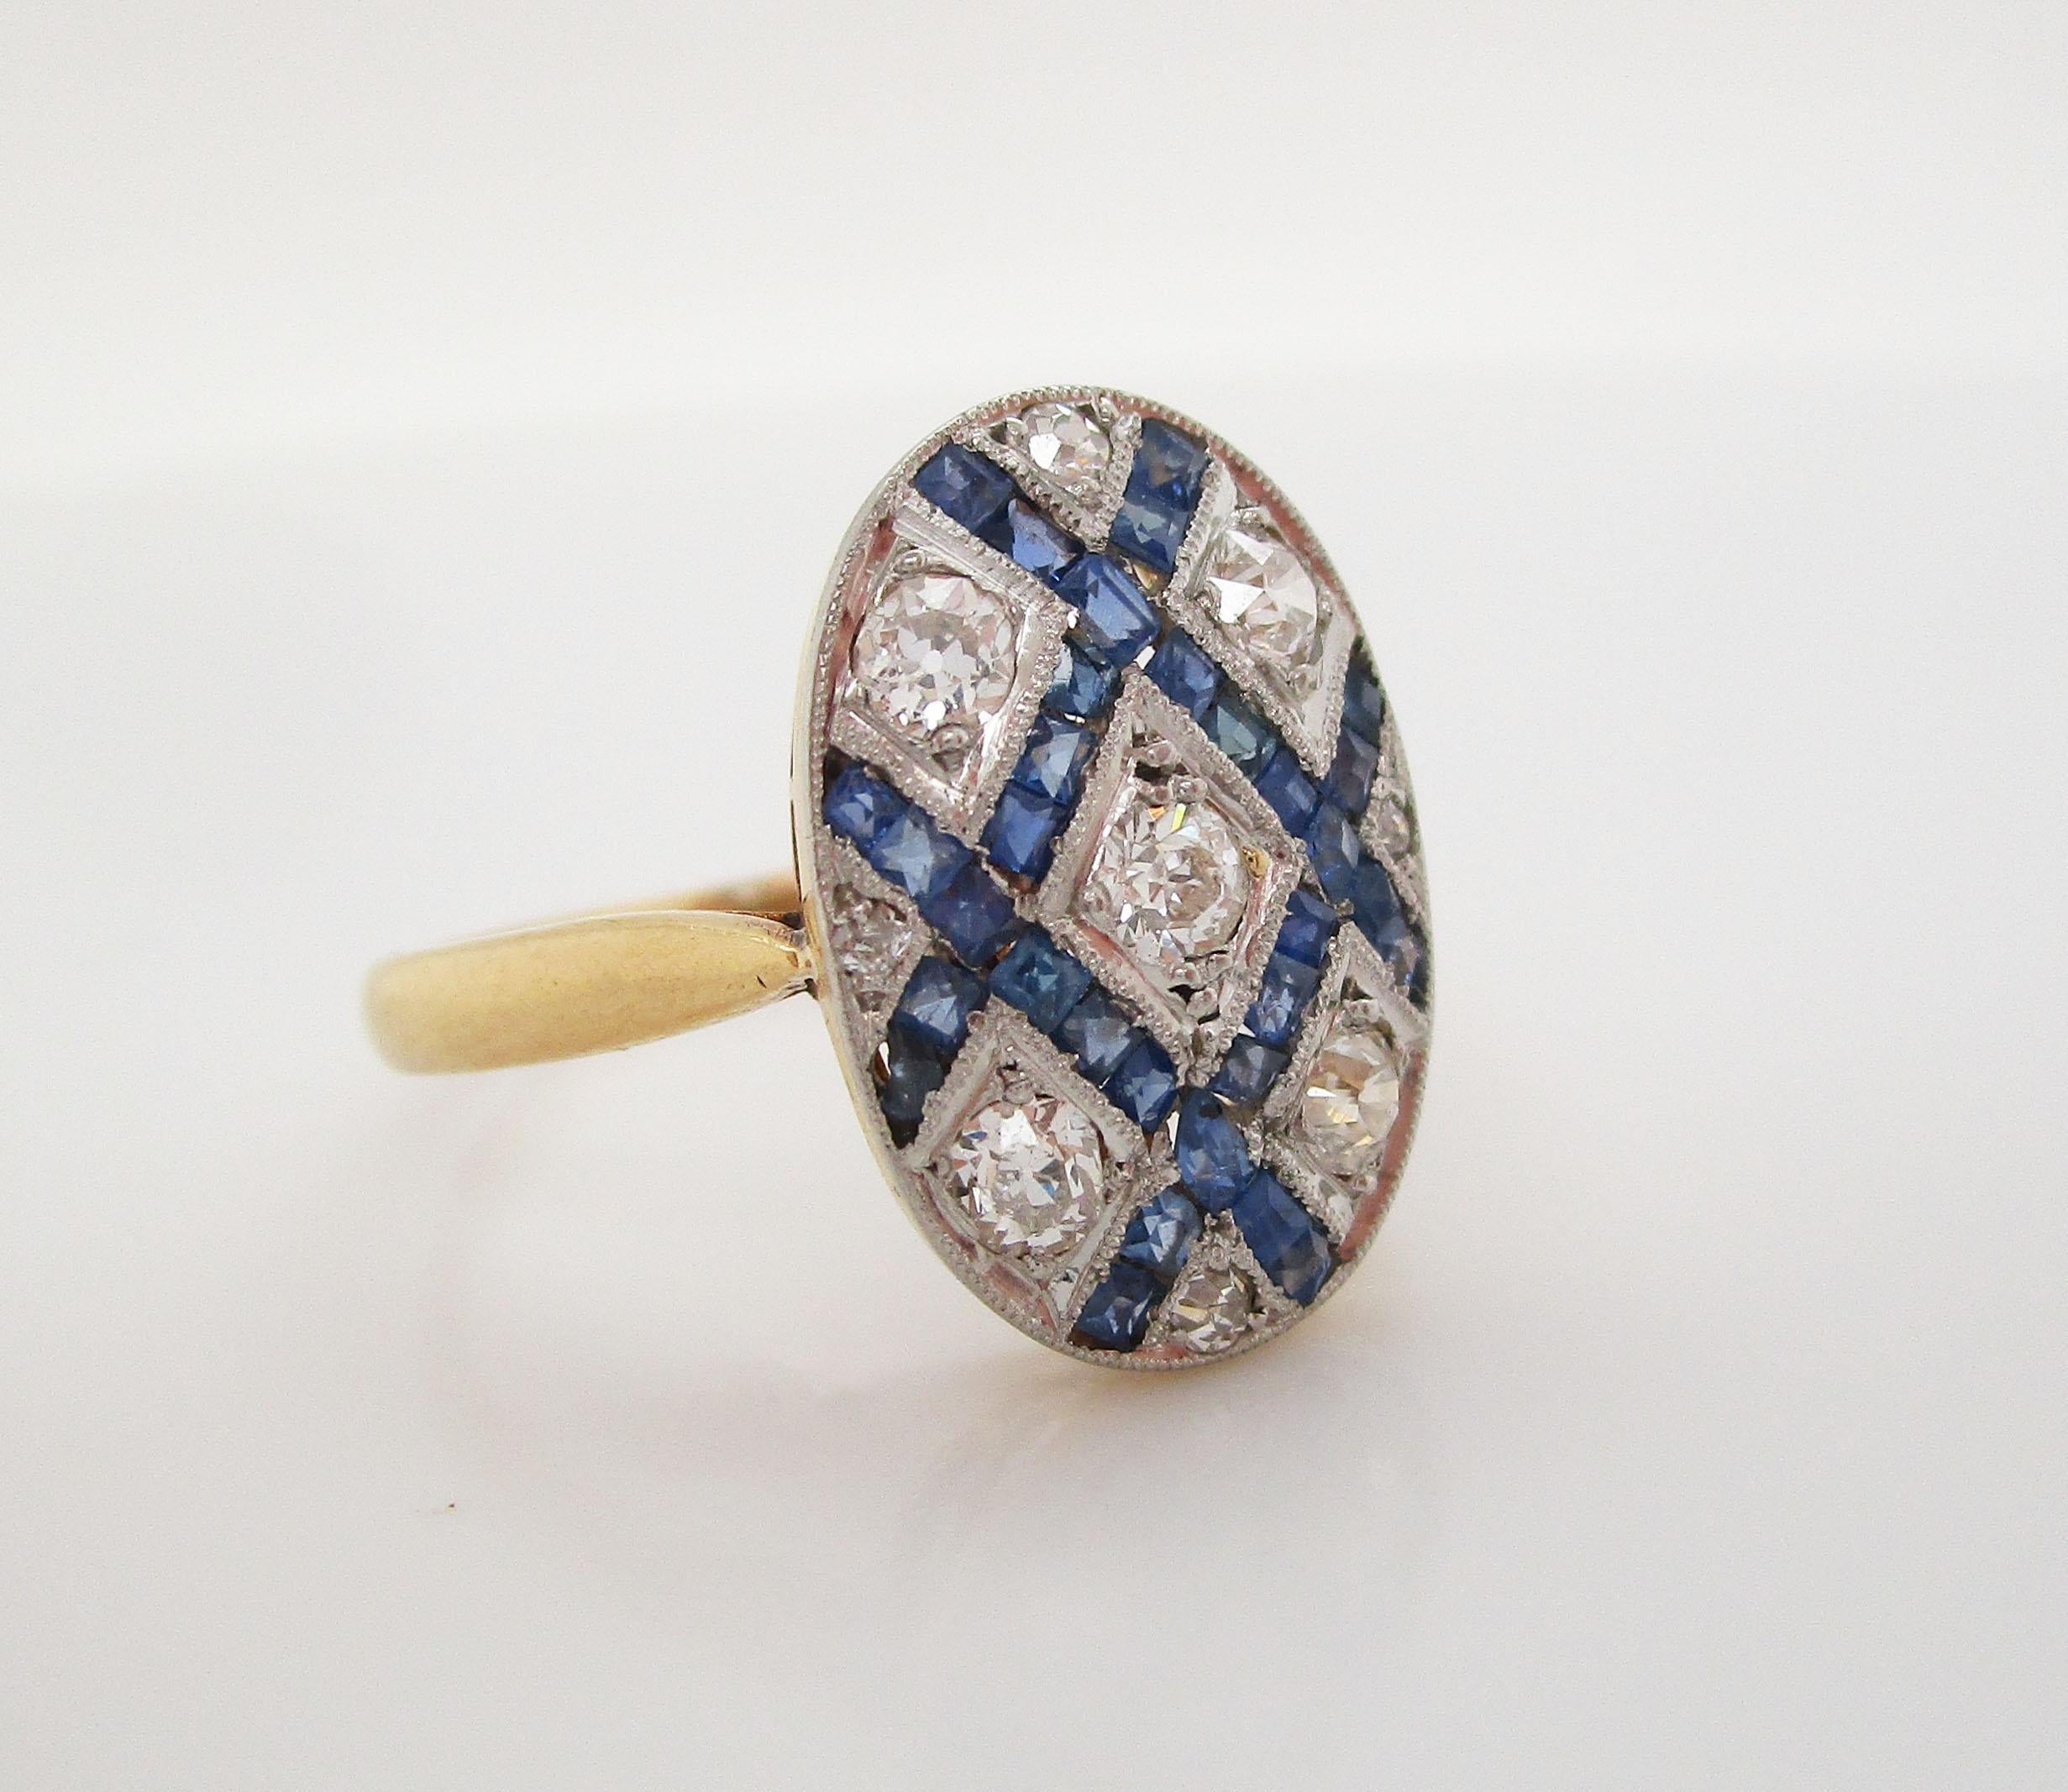 This amazing French ring is from the Art Deco movement and features a brilliant combination of white old mine cut diamonds and royal blue natural sapphires in a platinum over 18k gold setting. The stones are arranged in an incredibly intricate